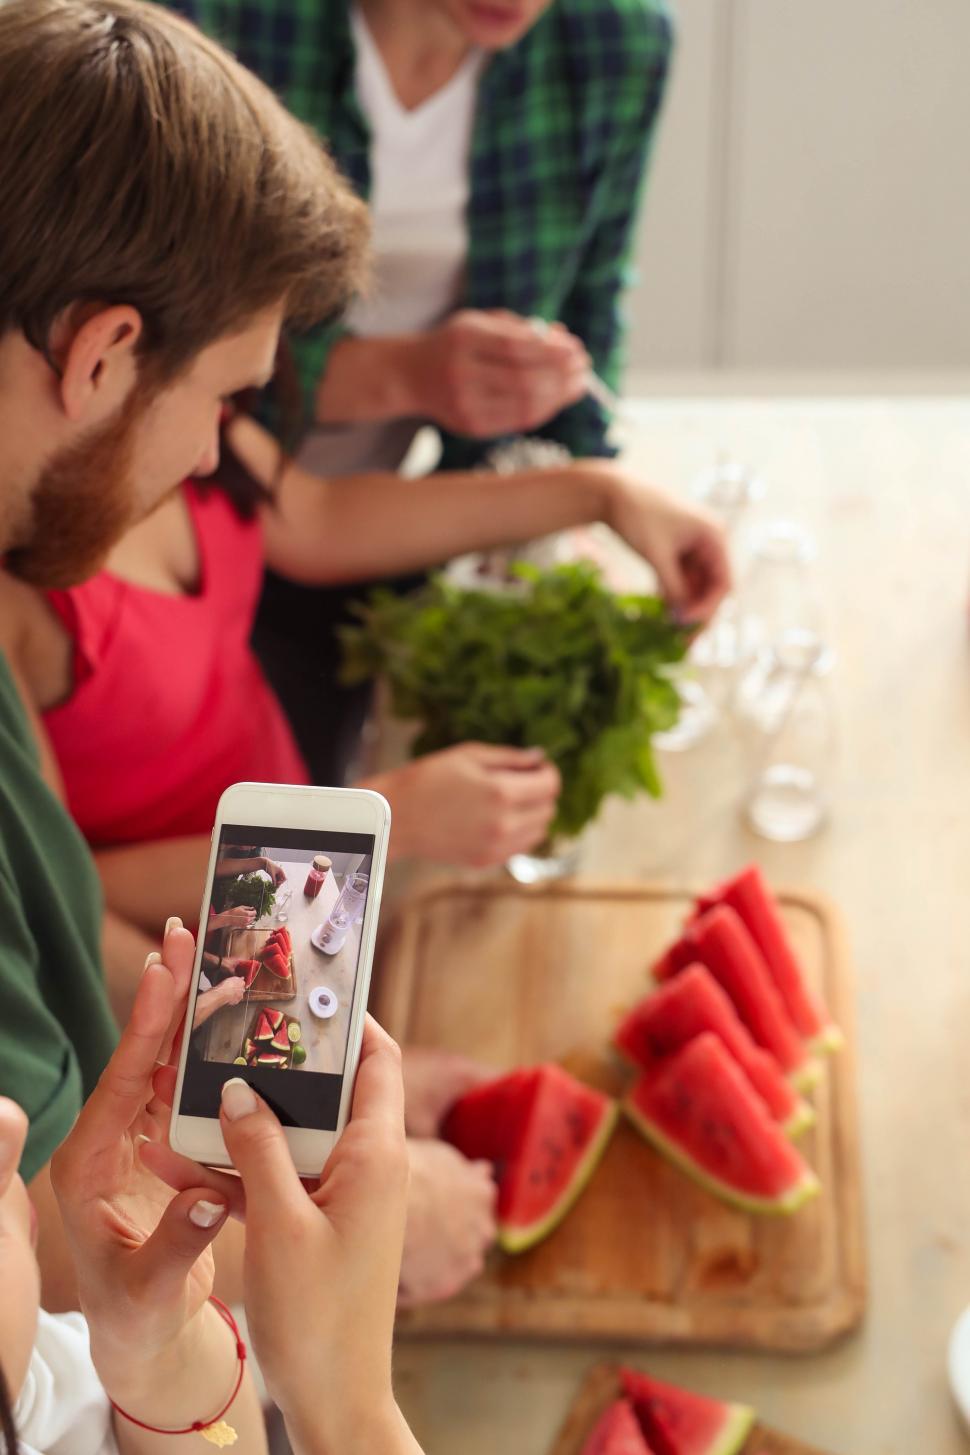 Free Image of Cooking together, taking photos 